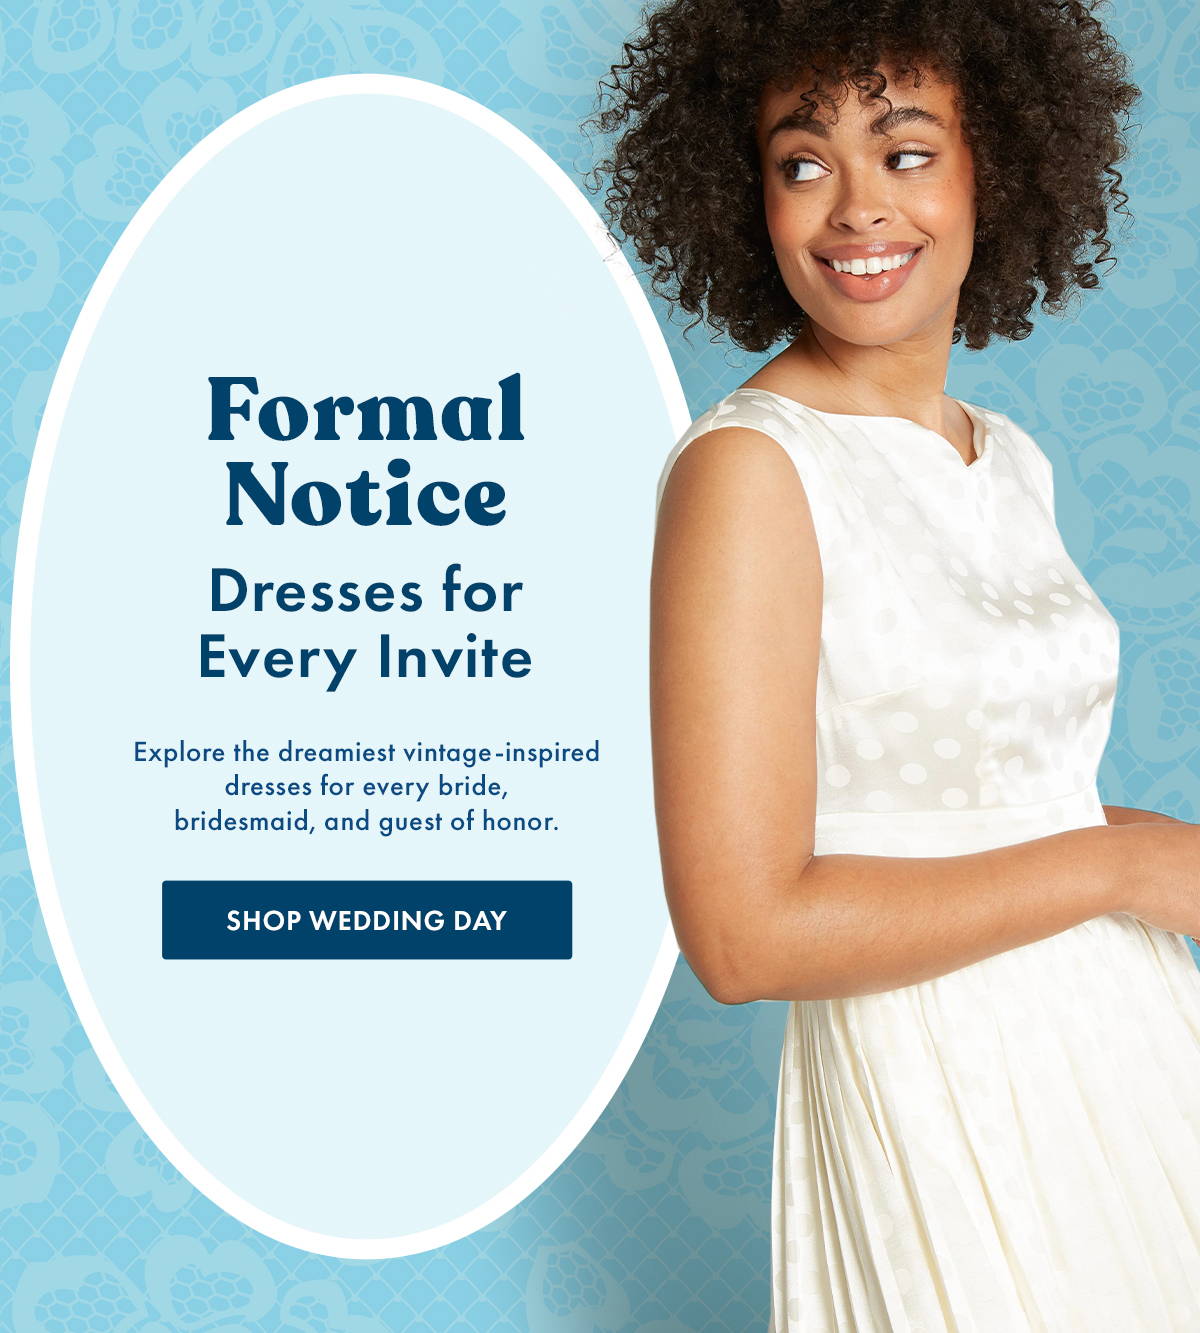 Formal Notice - Dresses for Every Invite. Shop Wedding Day